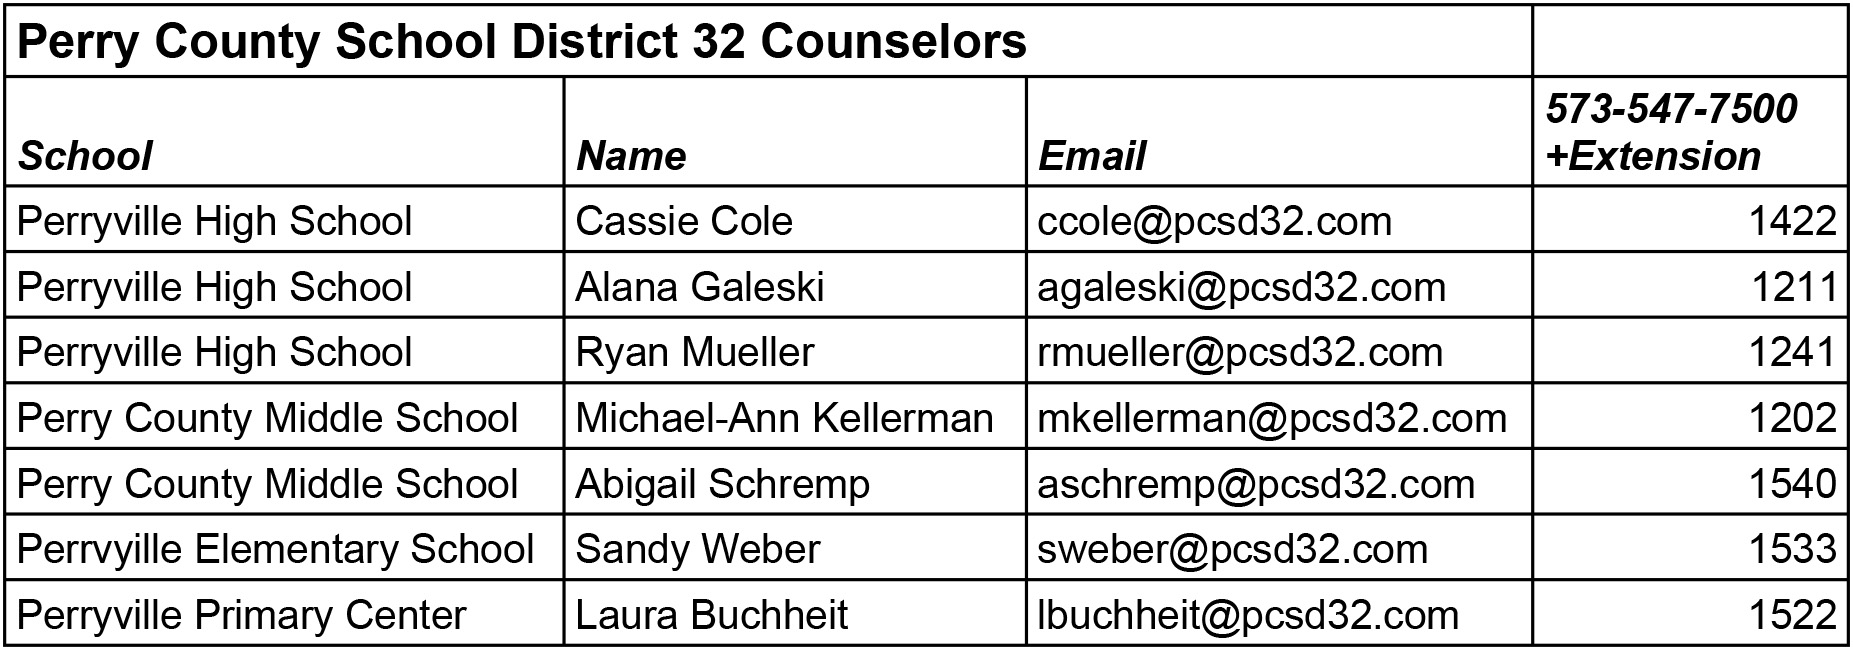 District 32 Counselors